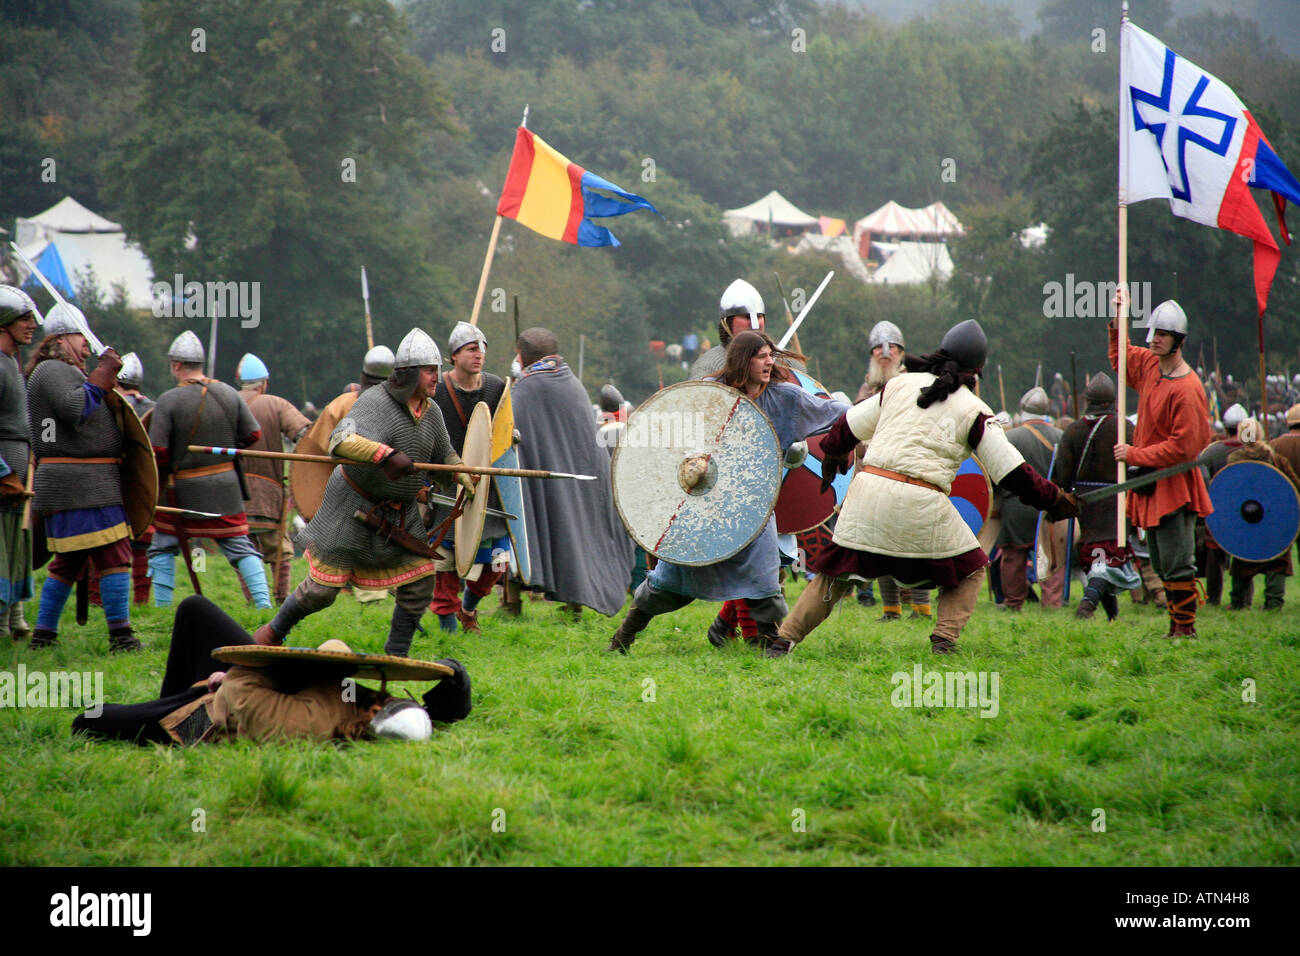 The Historic 1066 Battle of Hastings England re creation at Hastings on the actual fields where the Battle took place. Stock Photo